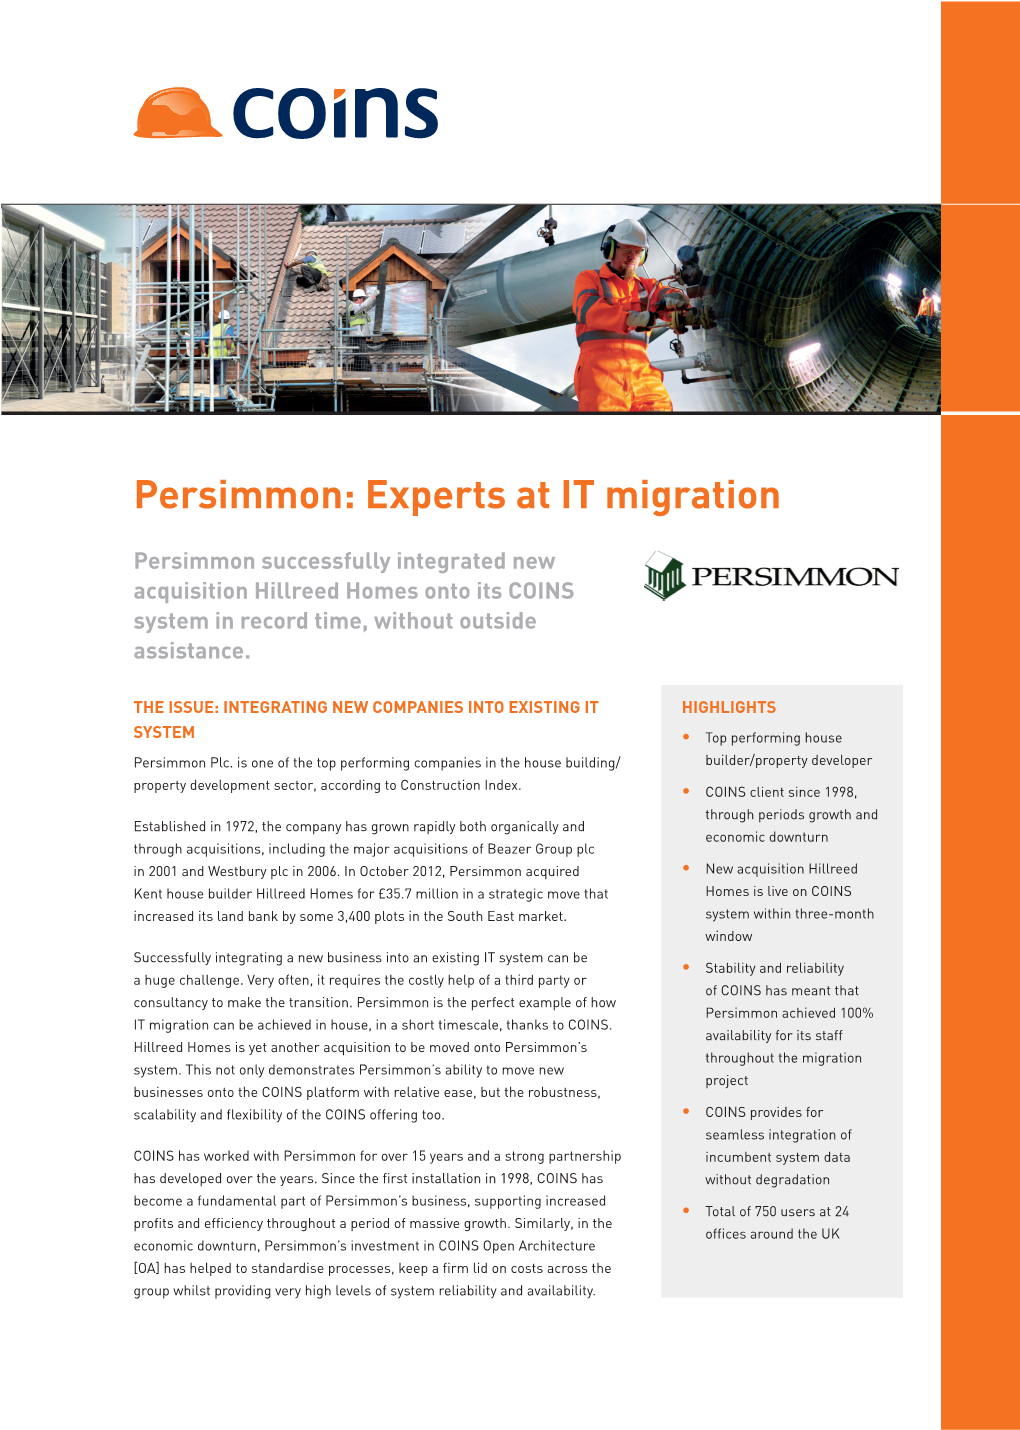 Persimmon: Experts at IT Migration